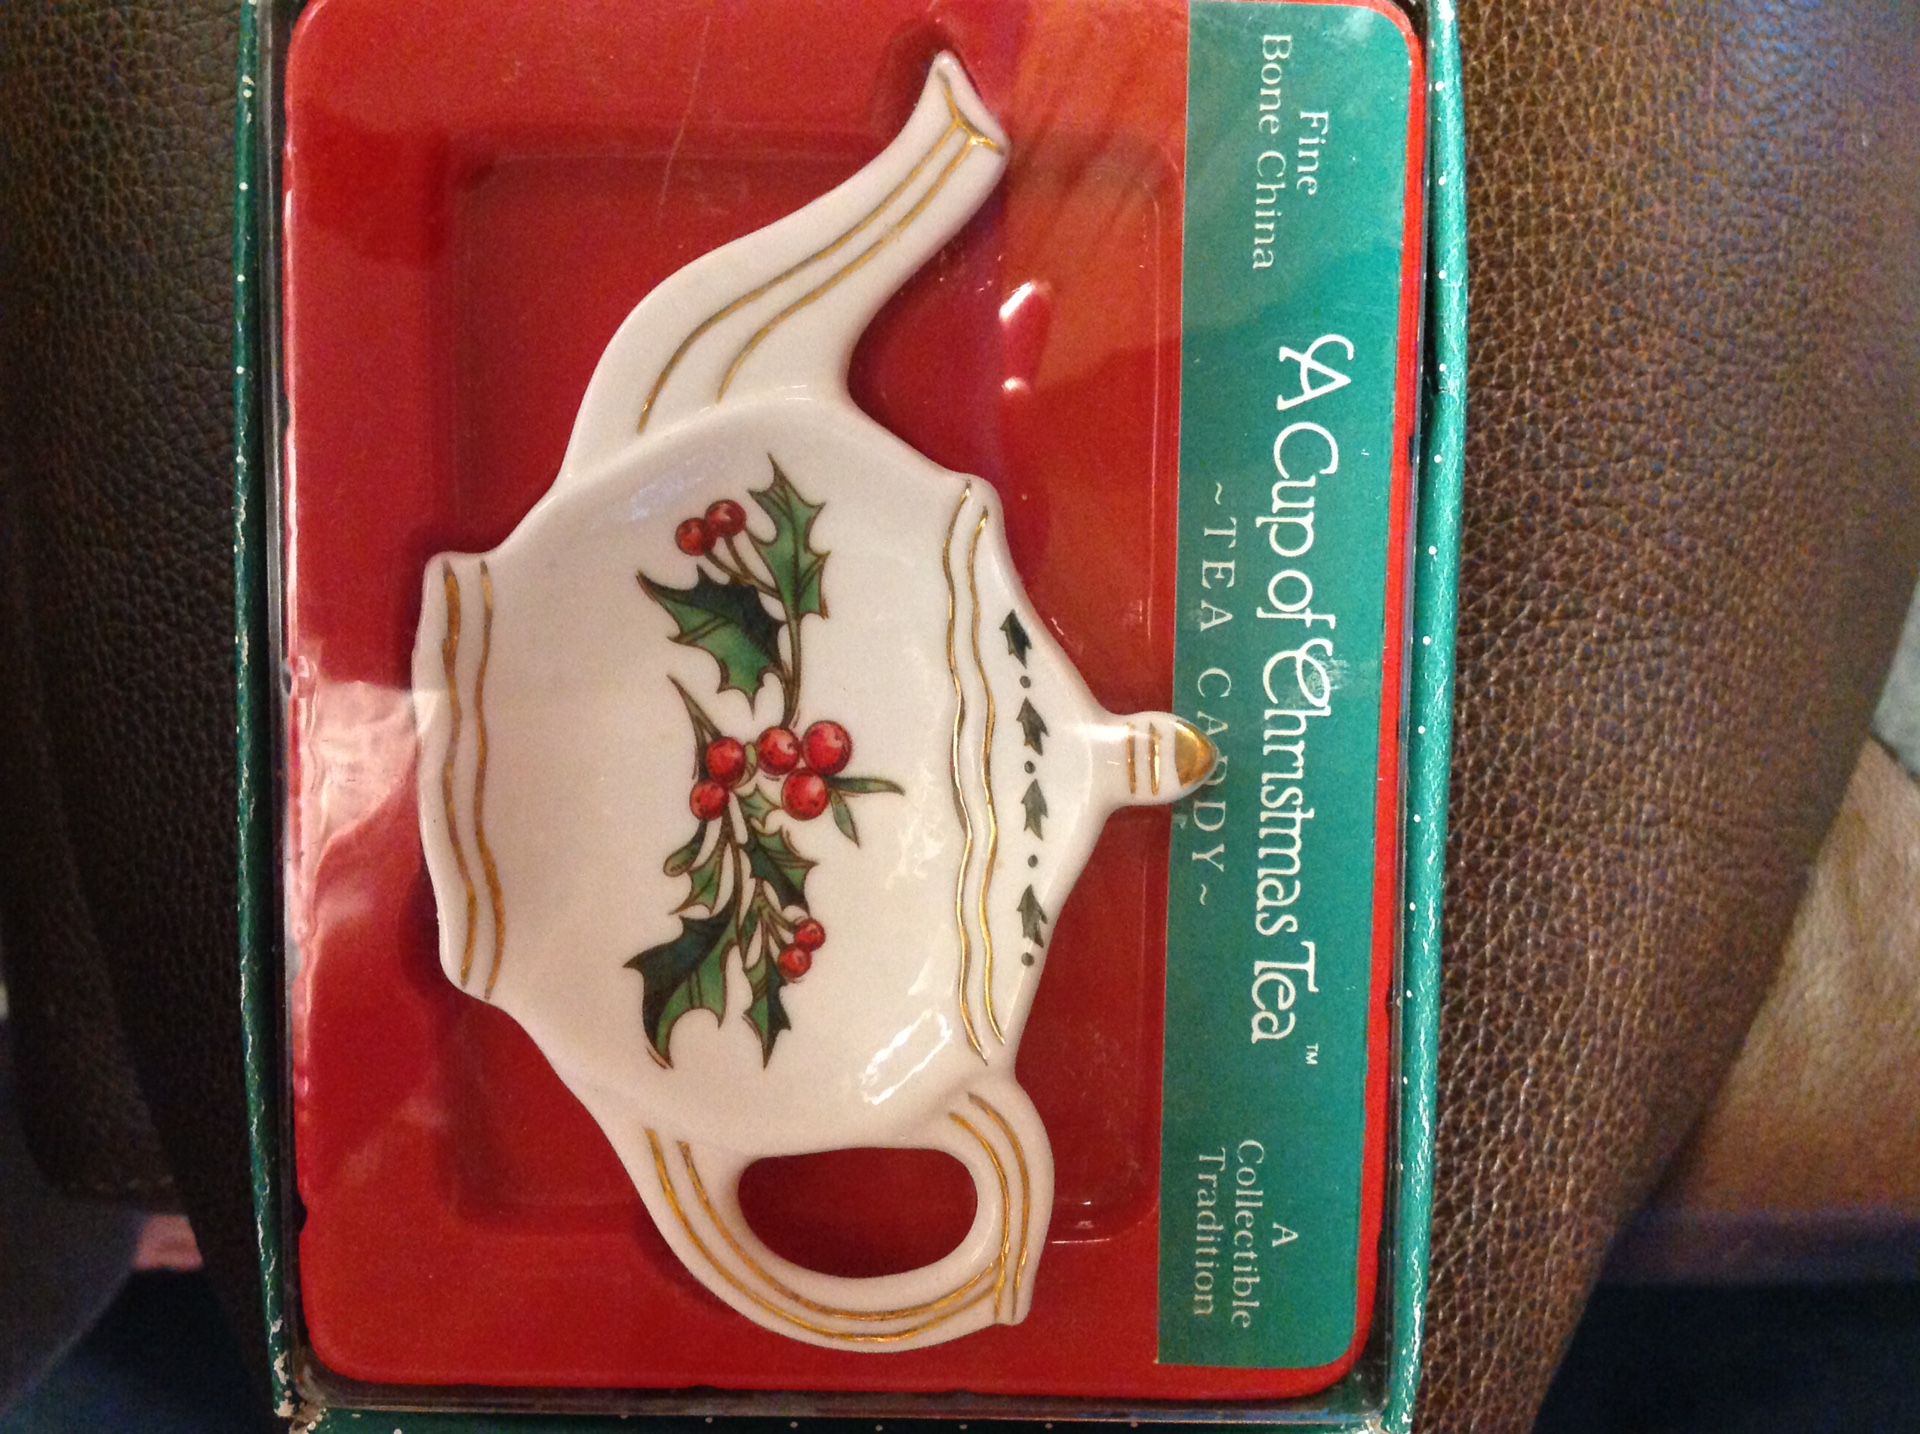 New Fine Bone China Christmas Tea Spoon or Candy caddy by Cup of Christmas Tea